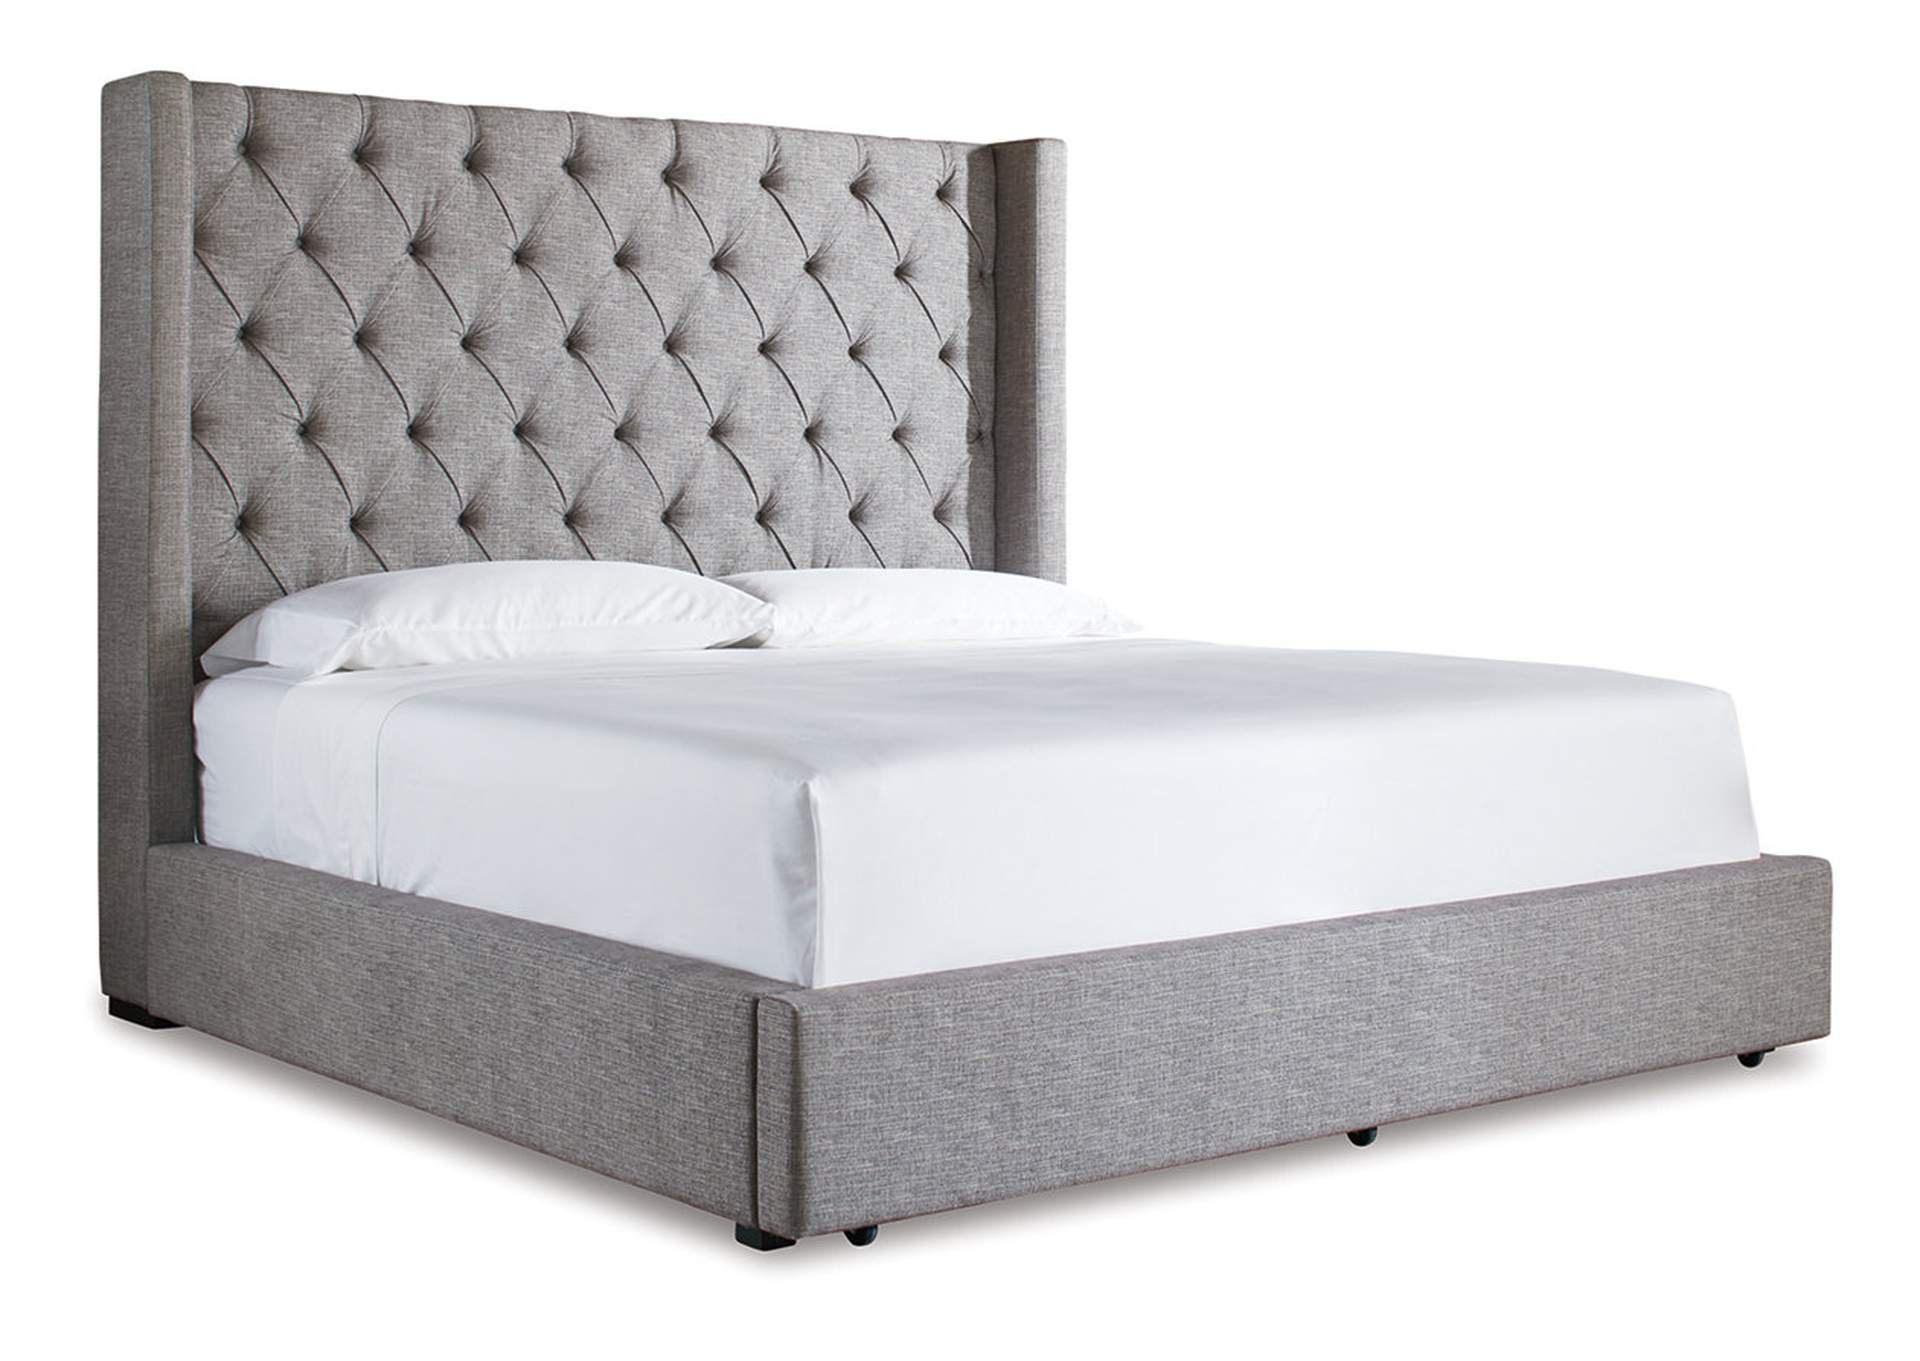 Sorinella California King Upholstered Bed with 1 Large Storage Drawer,Ashley